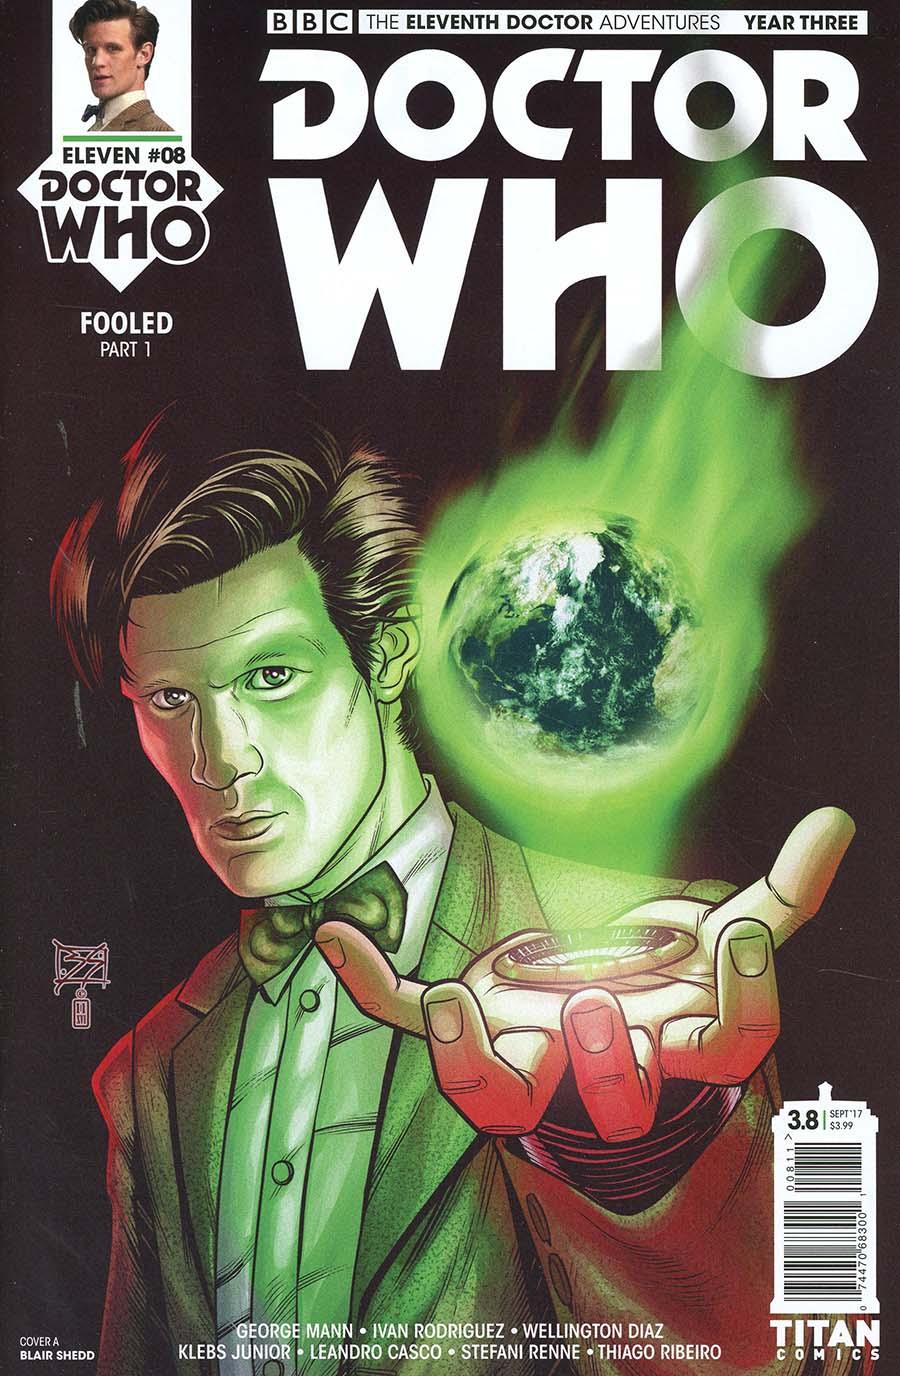 Doctor Who 11th Doctor Year Three Vol. 1 #8